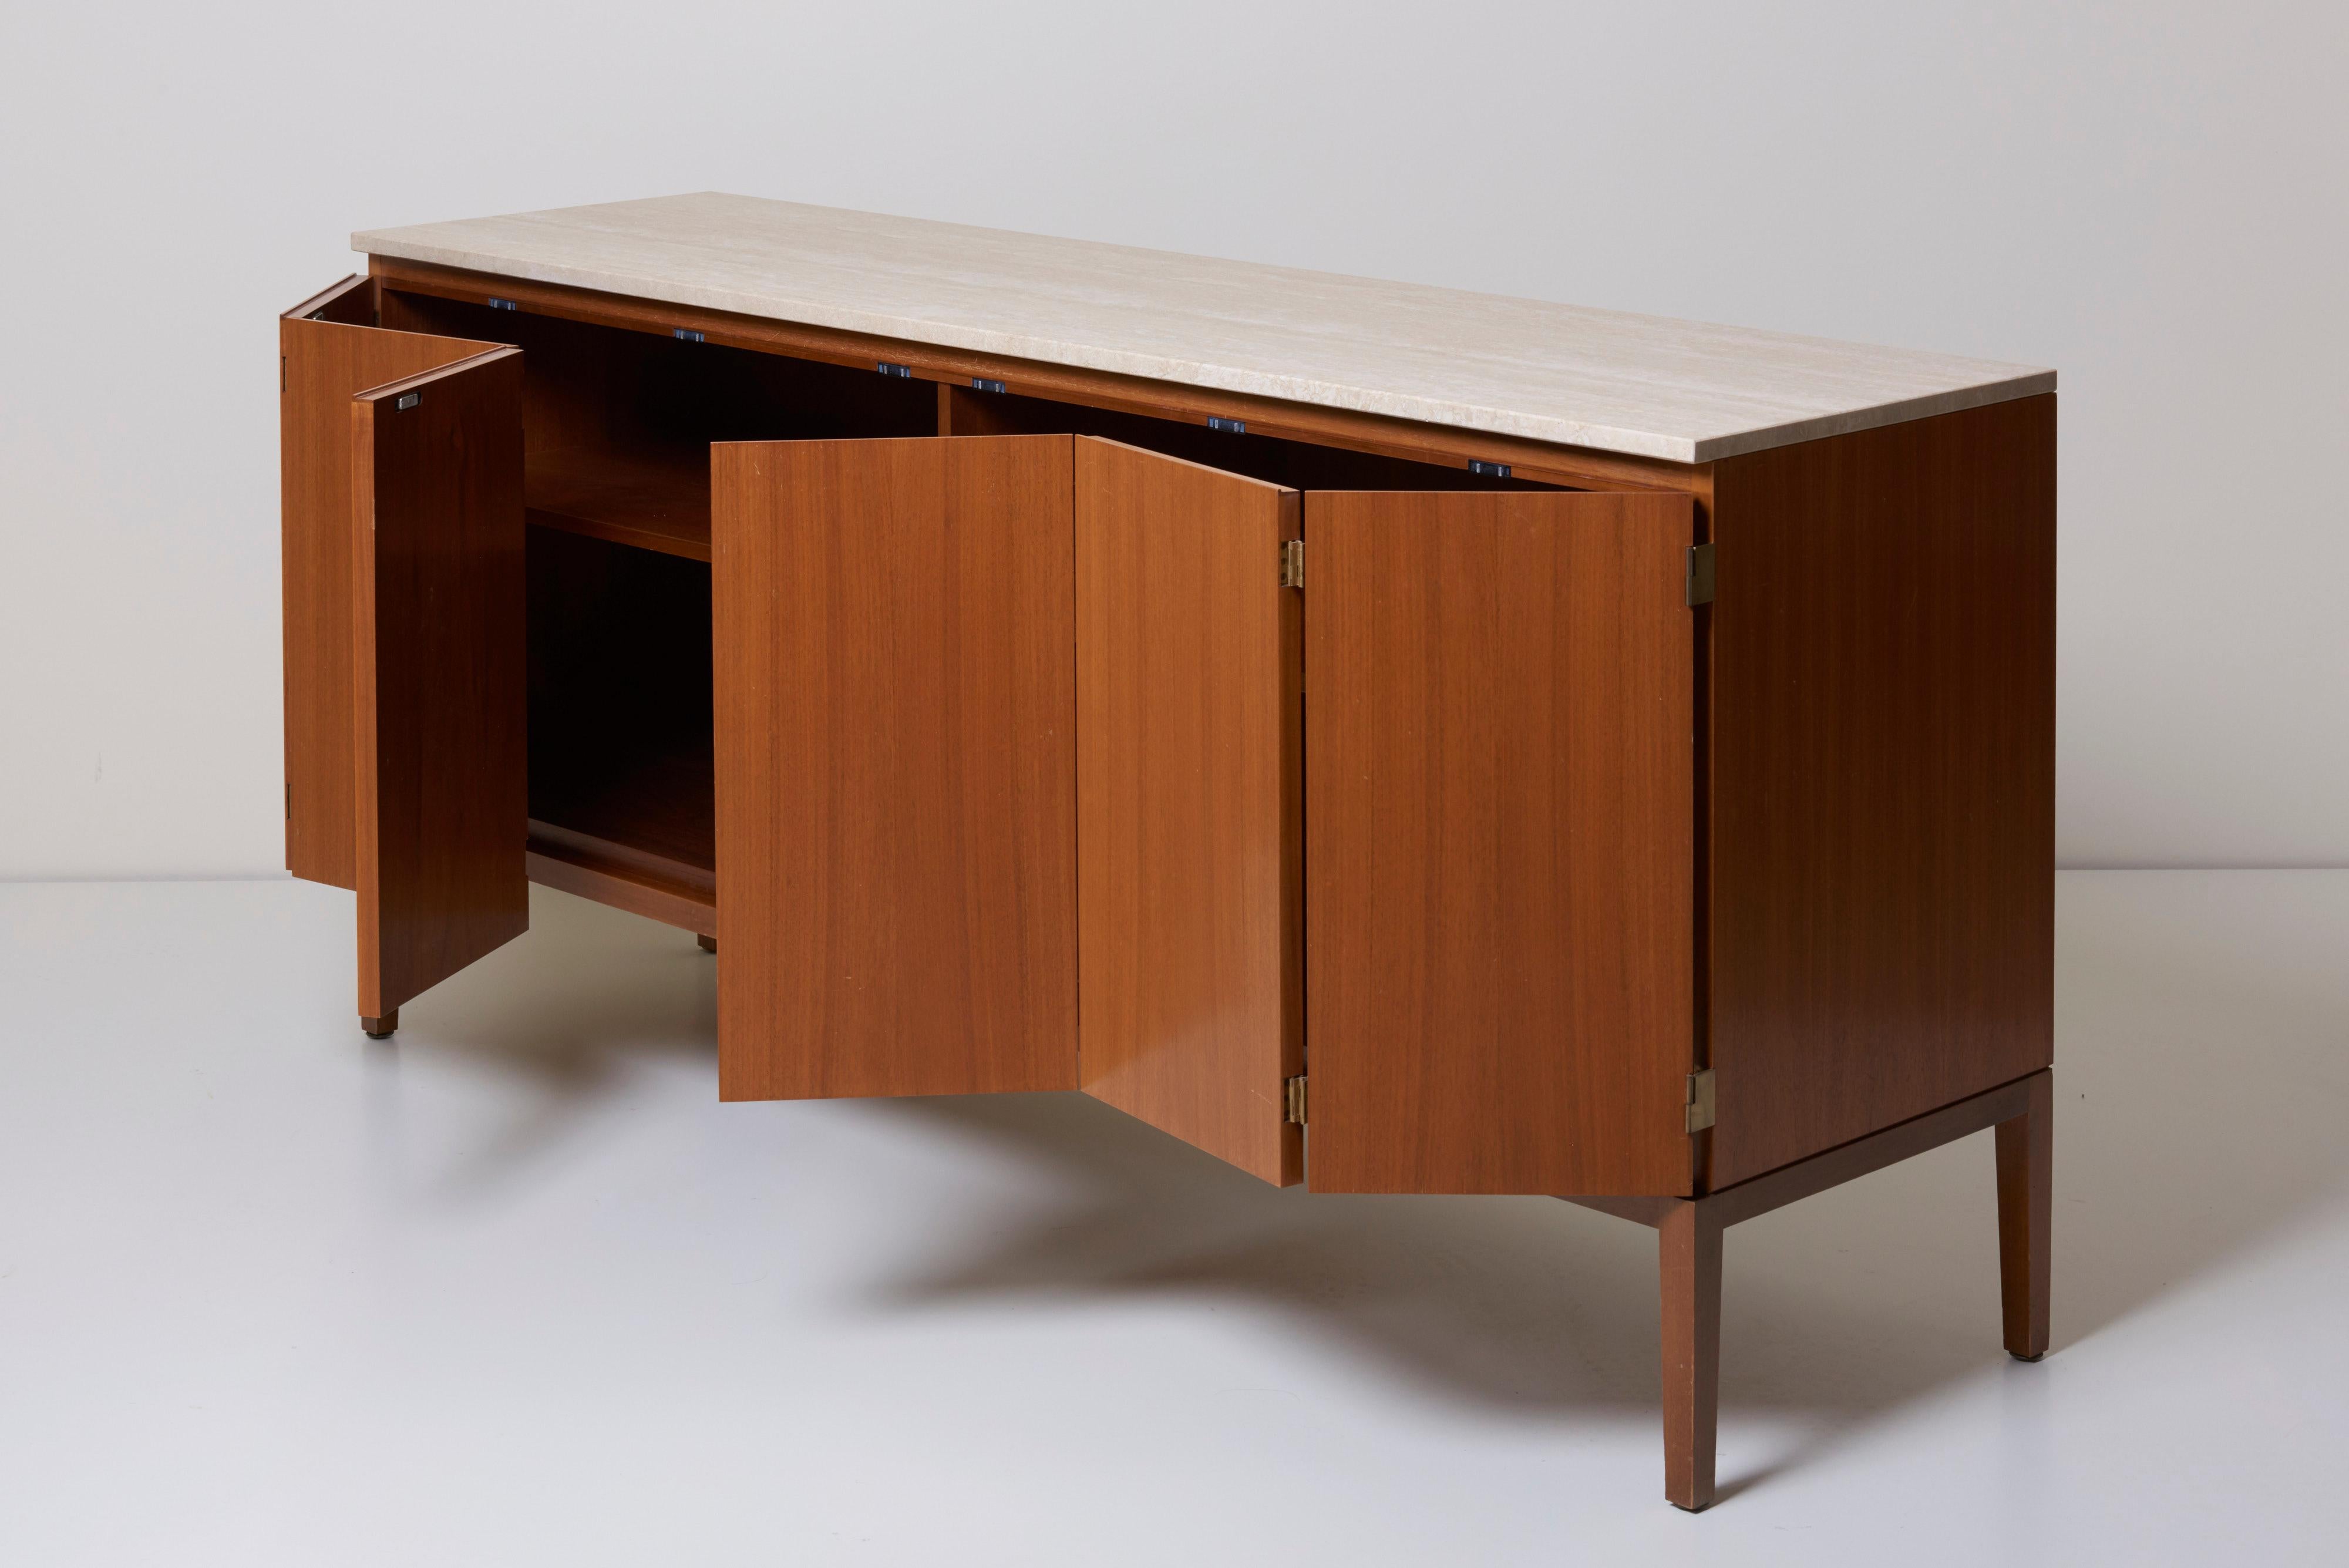 Mid-20th Century Travertine Top Paul McCobb Credenza or Sideboard 7306 for Directional / WK Möbel